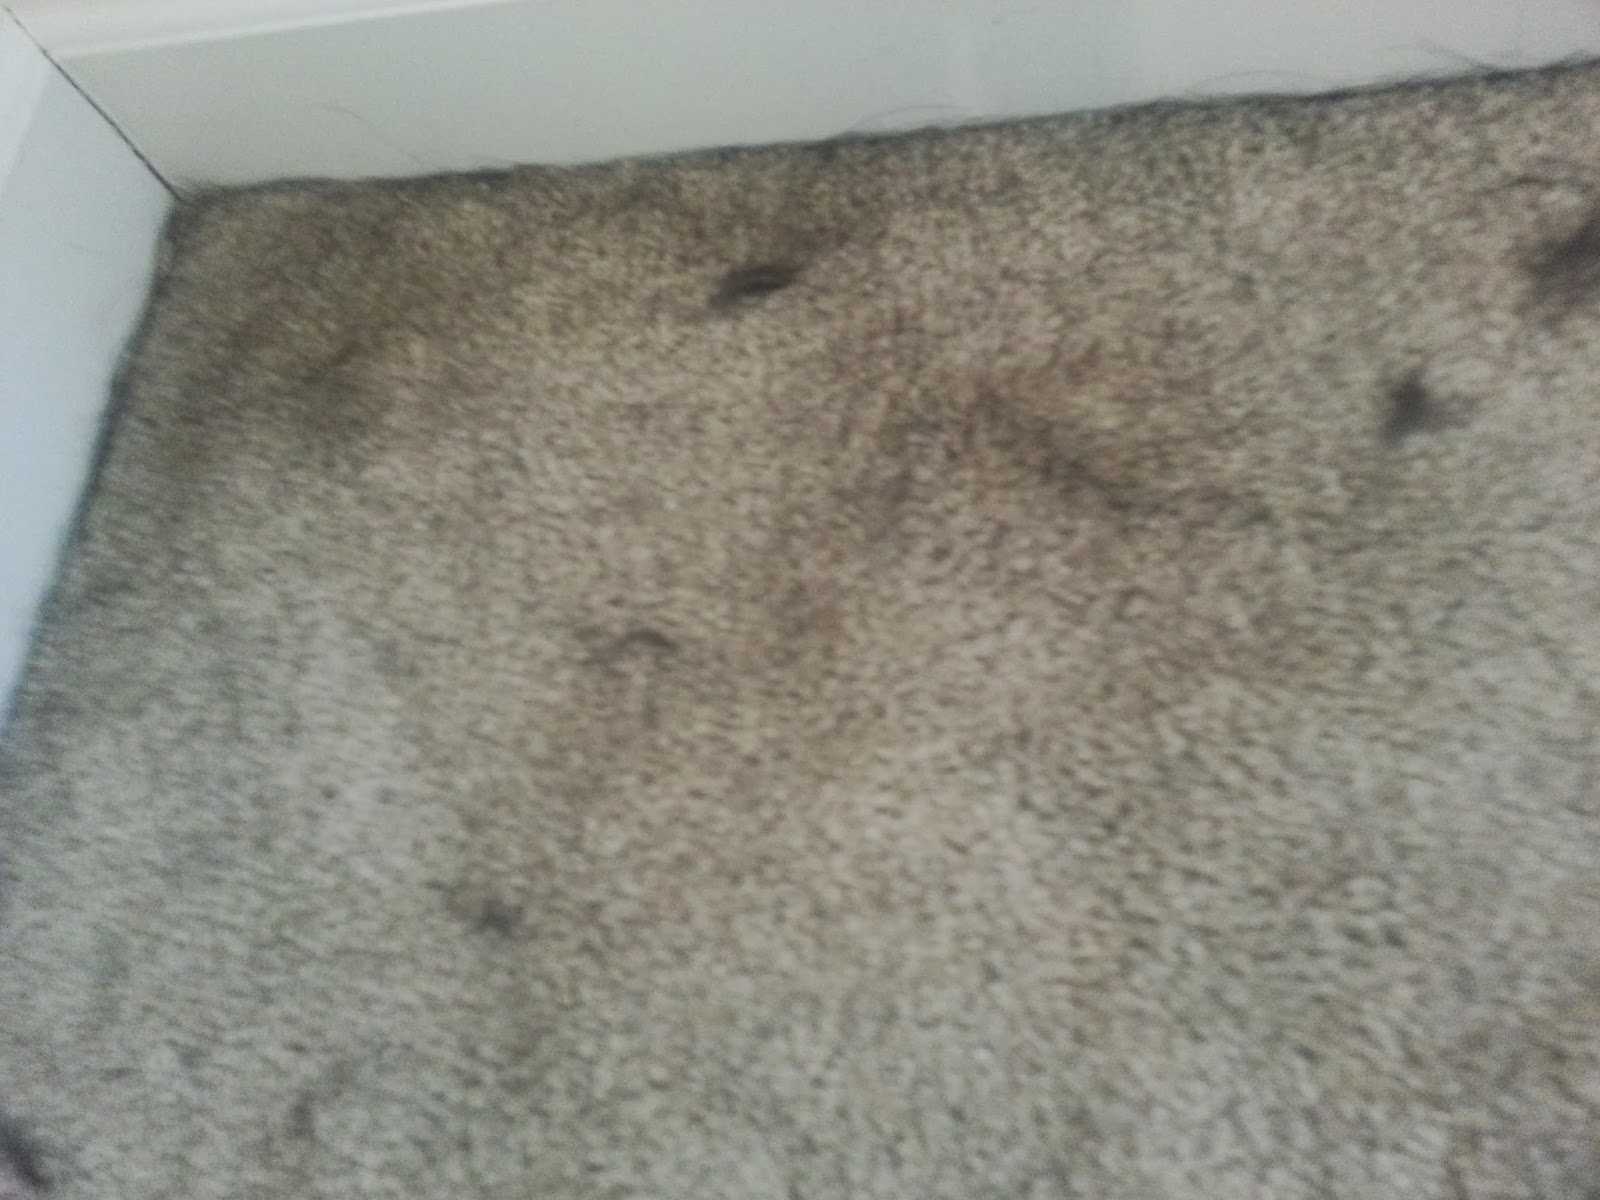 Our little Motes family: Removing pet hair from carpets, this is pretty ...